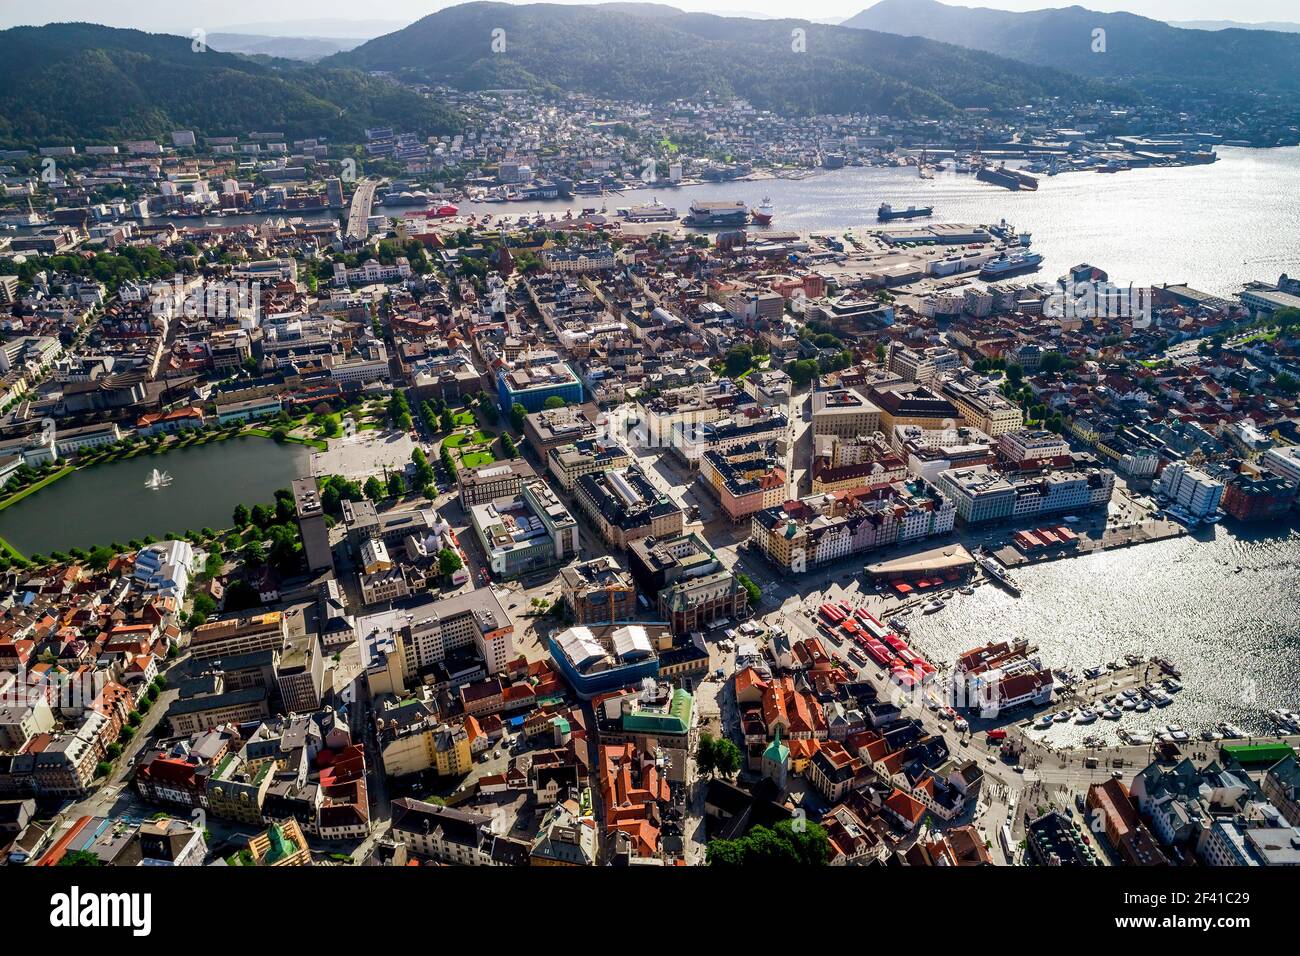 Bergen is a city and municipality in Hordaland on the west coast of Norway. Bergen is the second-largest city in Norway. The view from the height of bird flight. Aerial FPV drone flights. Stock Photo